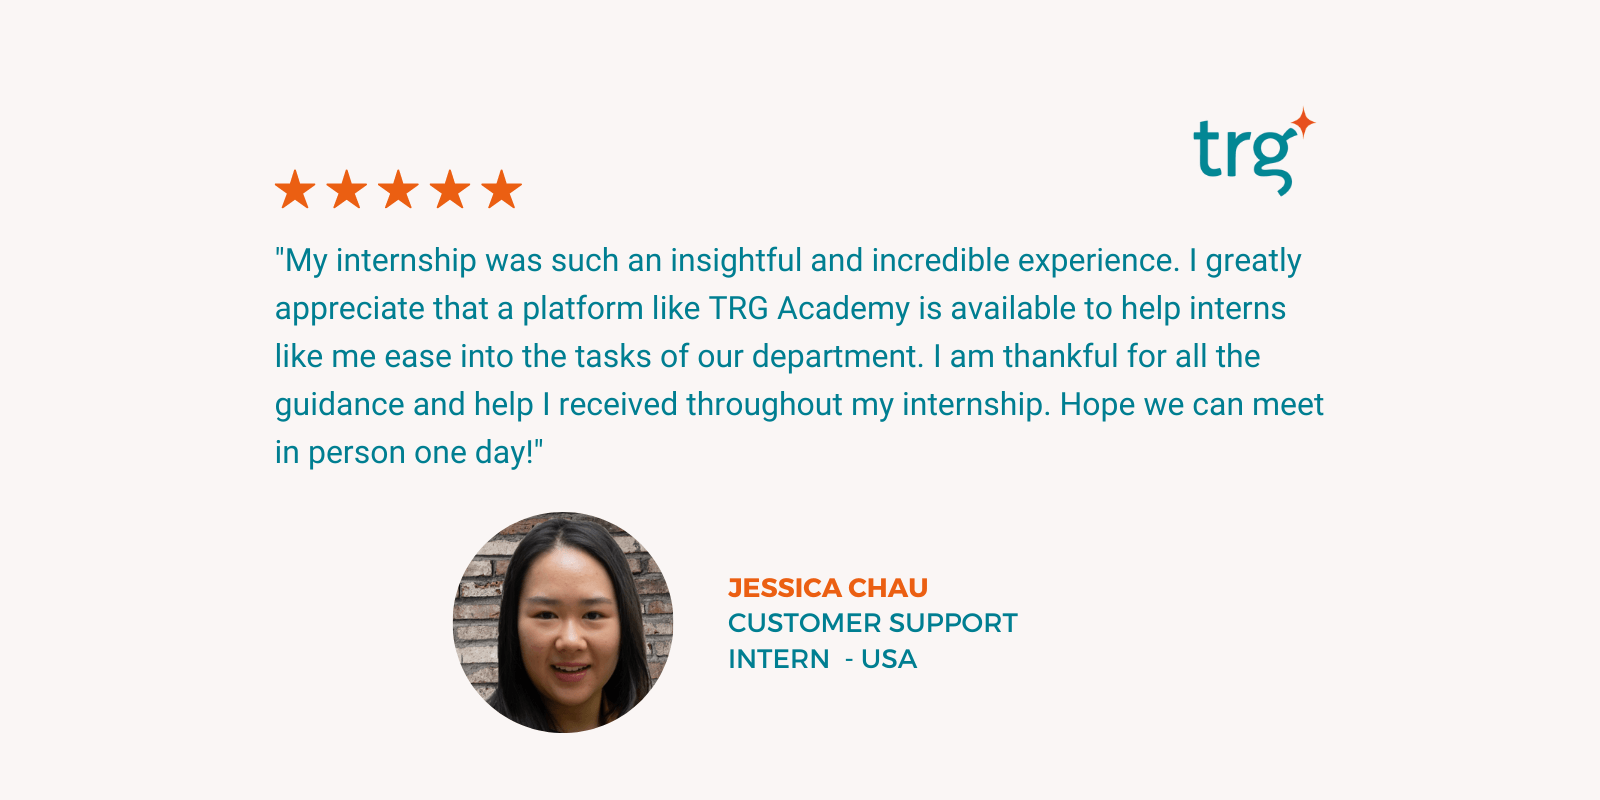 Internship testimonials - Episode 30: Such an insightful and incredible experience